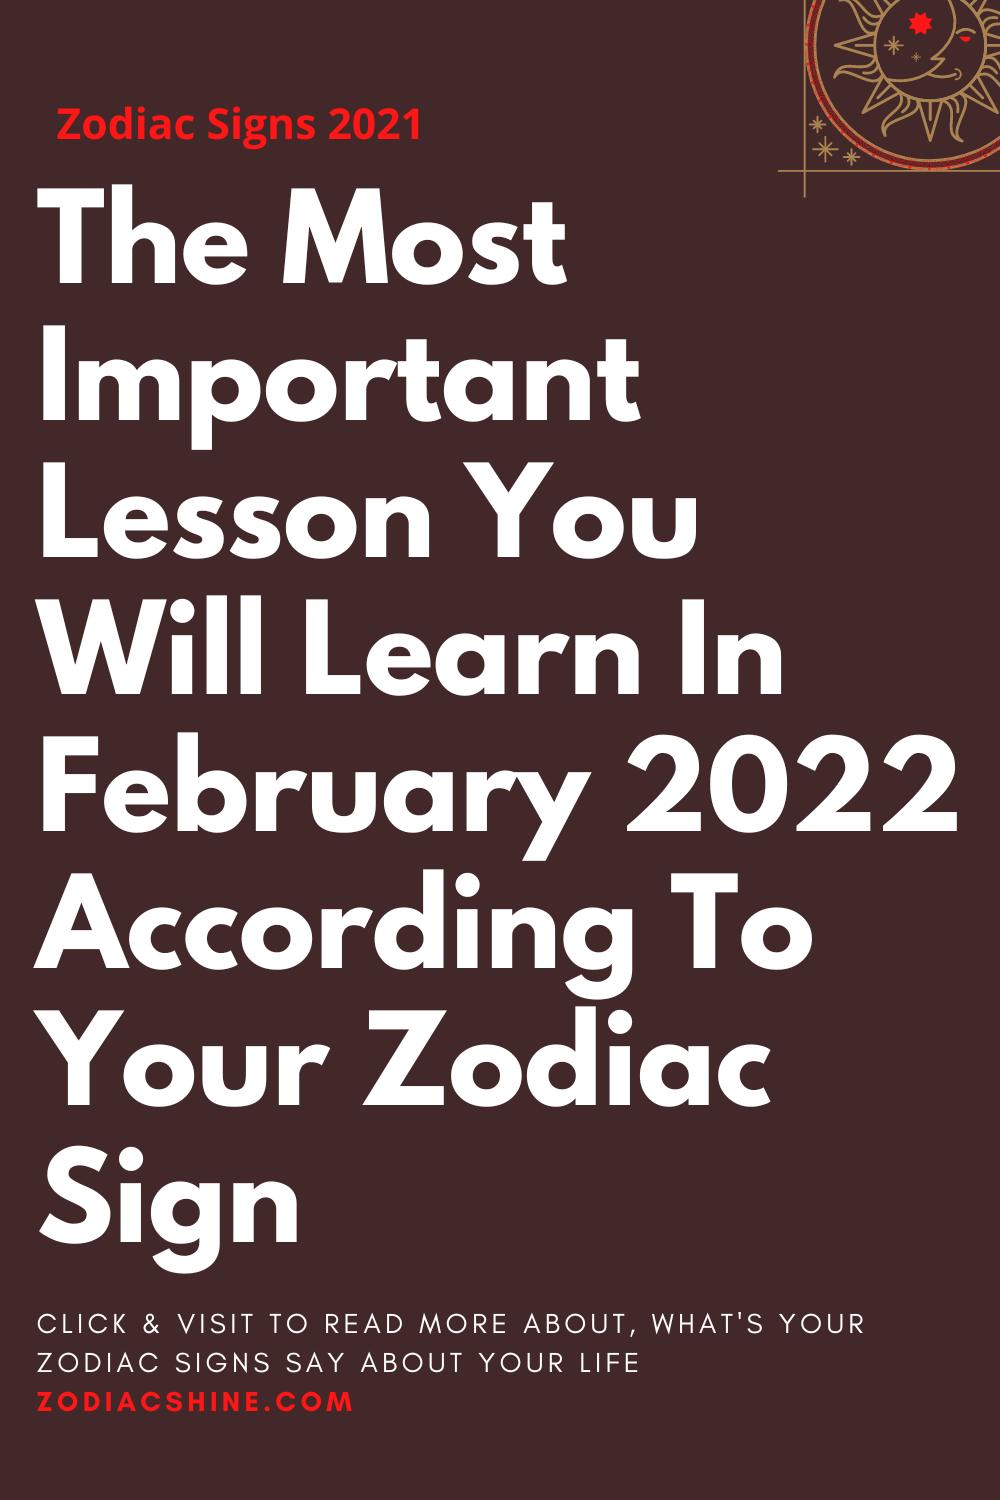 The Most Important Lesson You Will Learn In February 2022 According To Your Zodiac Sign